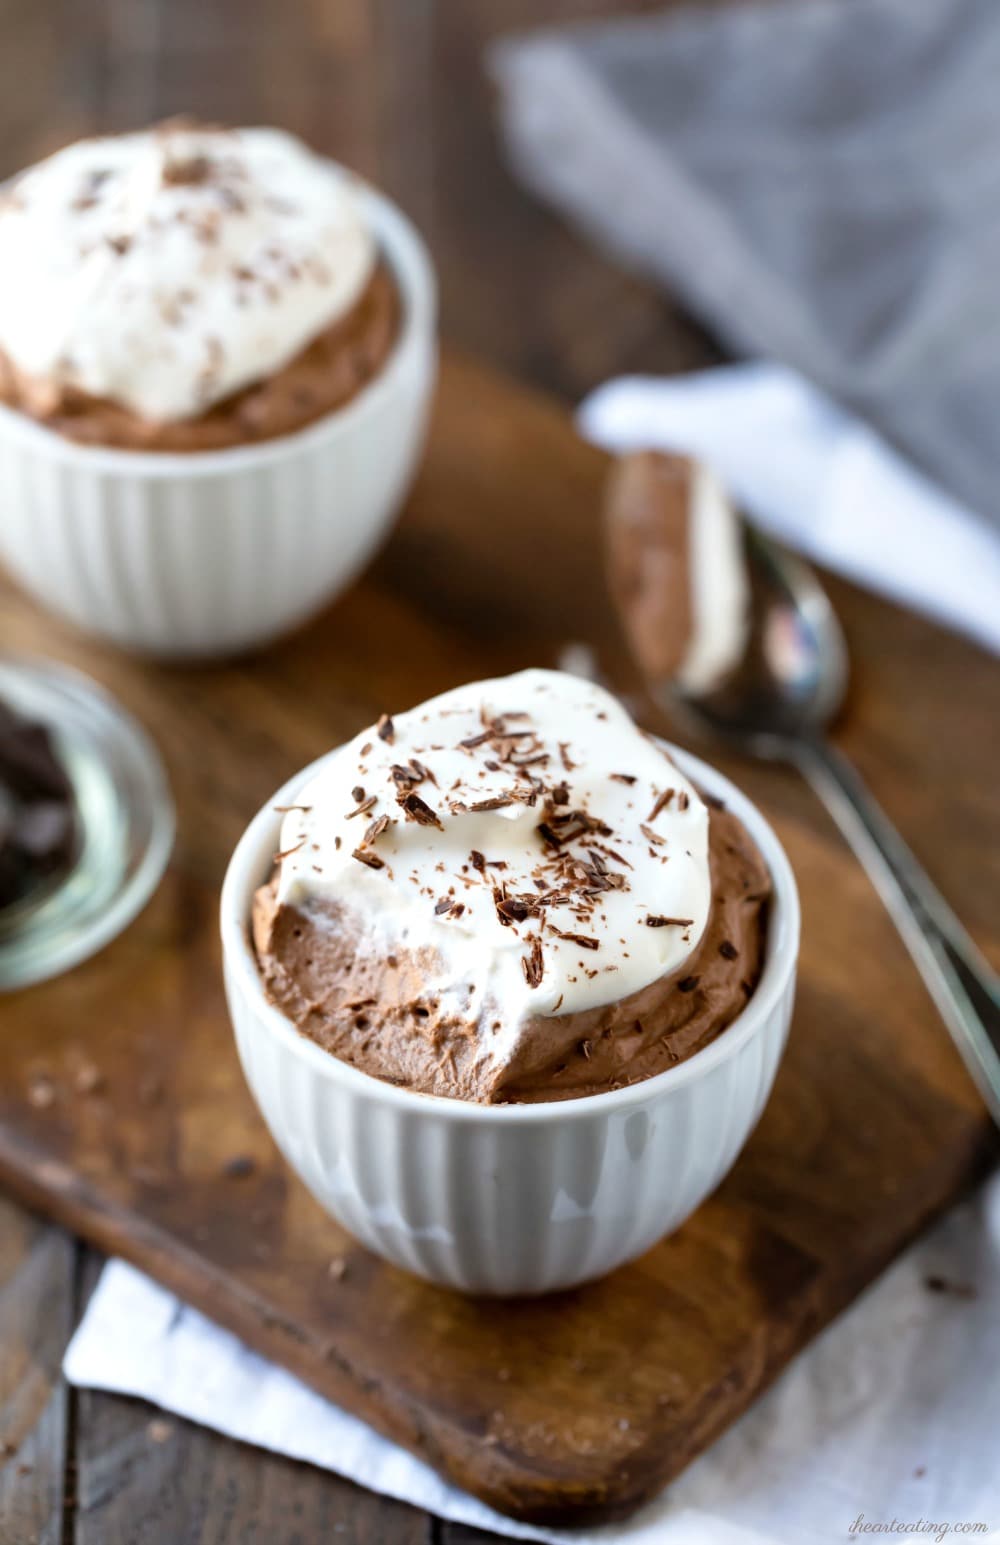 Chocolate mousse in a white dish with a bite missing